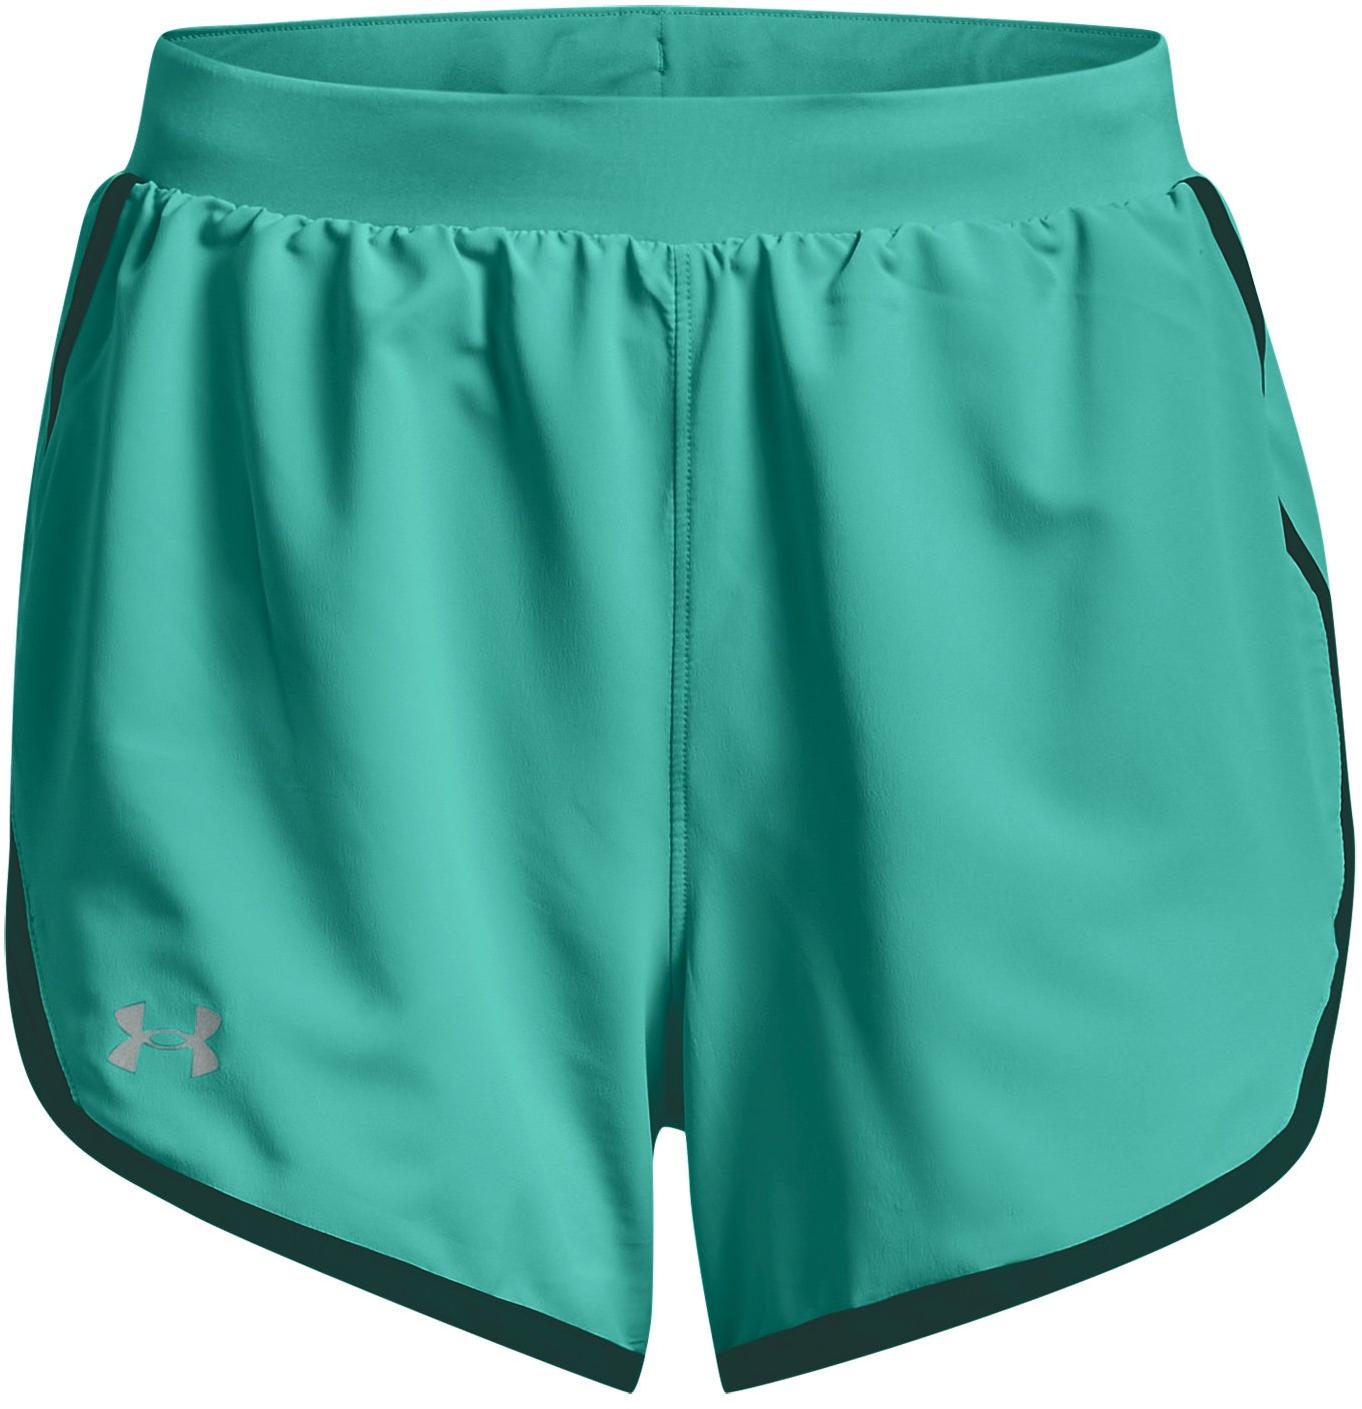 Under Armour Fly By 2.0 Short -GRN S